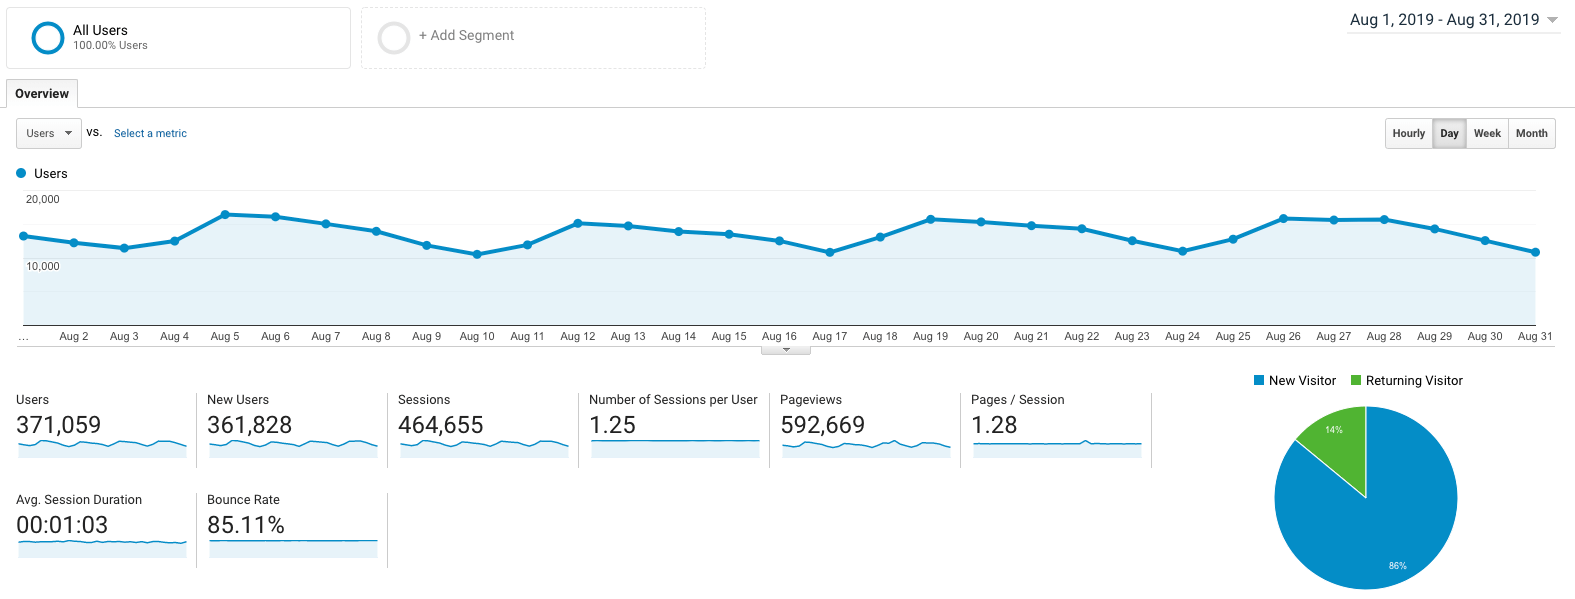 Blog Income Report August 2019 How I Made $30,000 Blogging Google Analytics Traffic